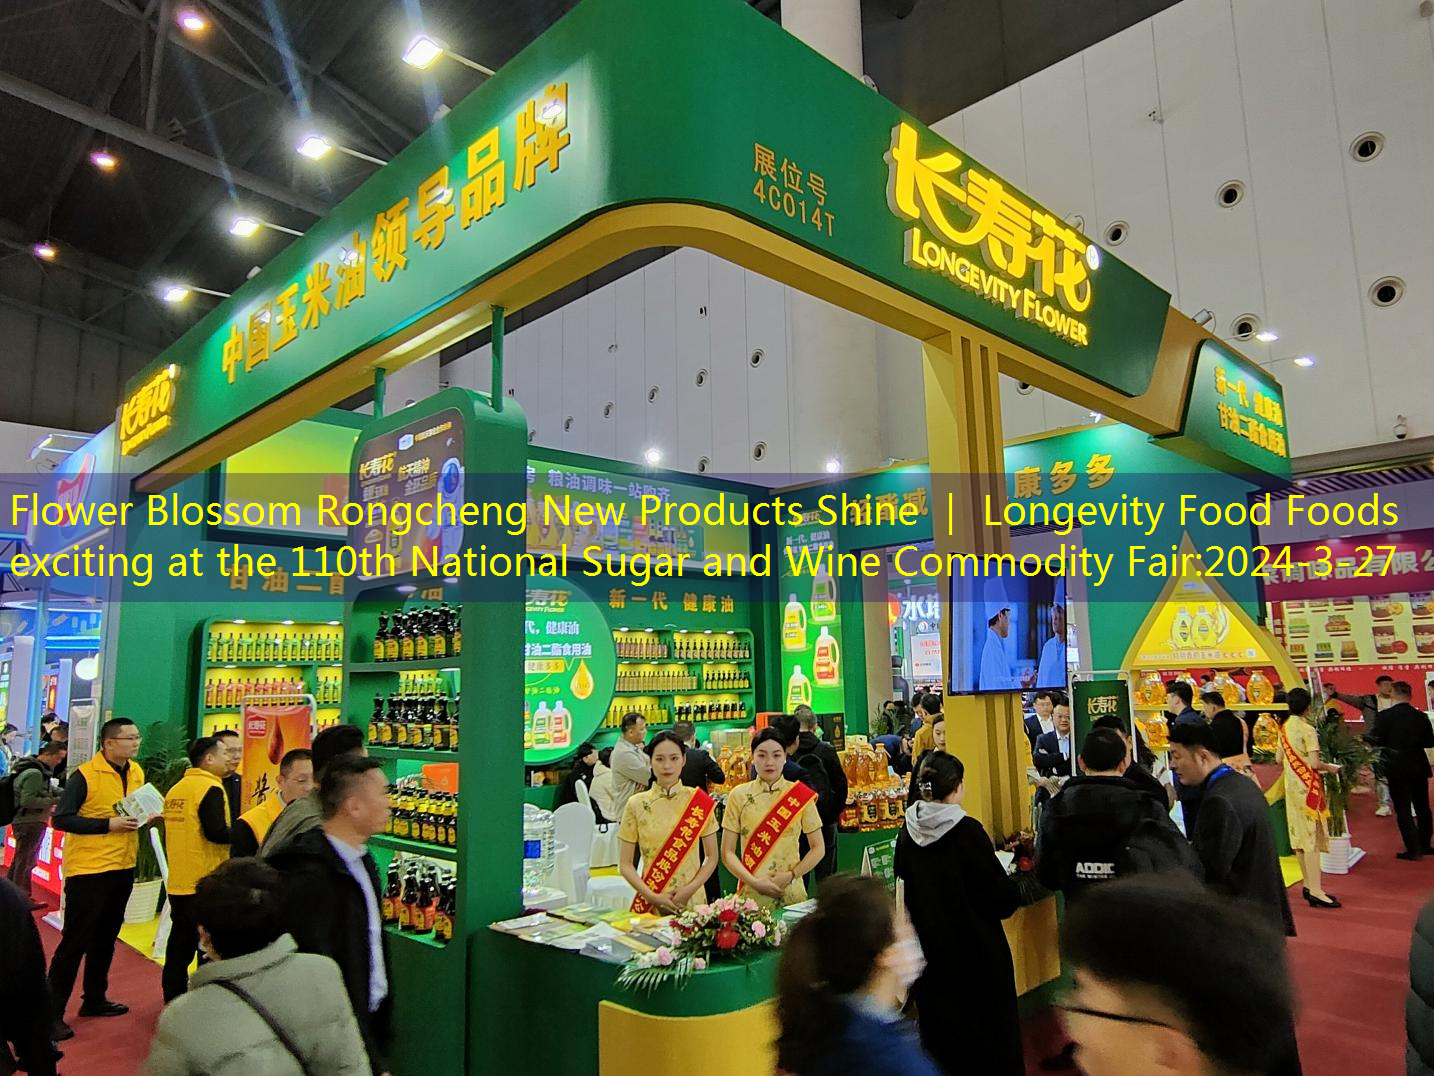 Flower Blossom Rongcheng New Products Shine ｜ Longevity Food Foods exciting at the 110th National Sugar and Wine Commodity Fair